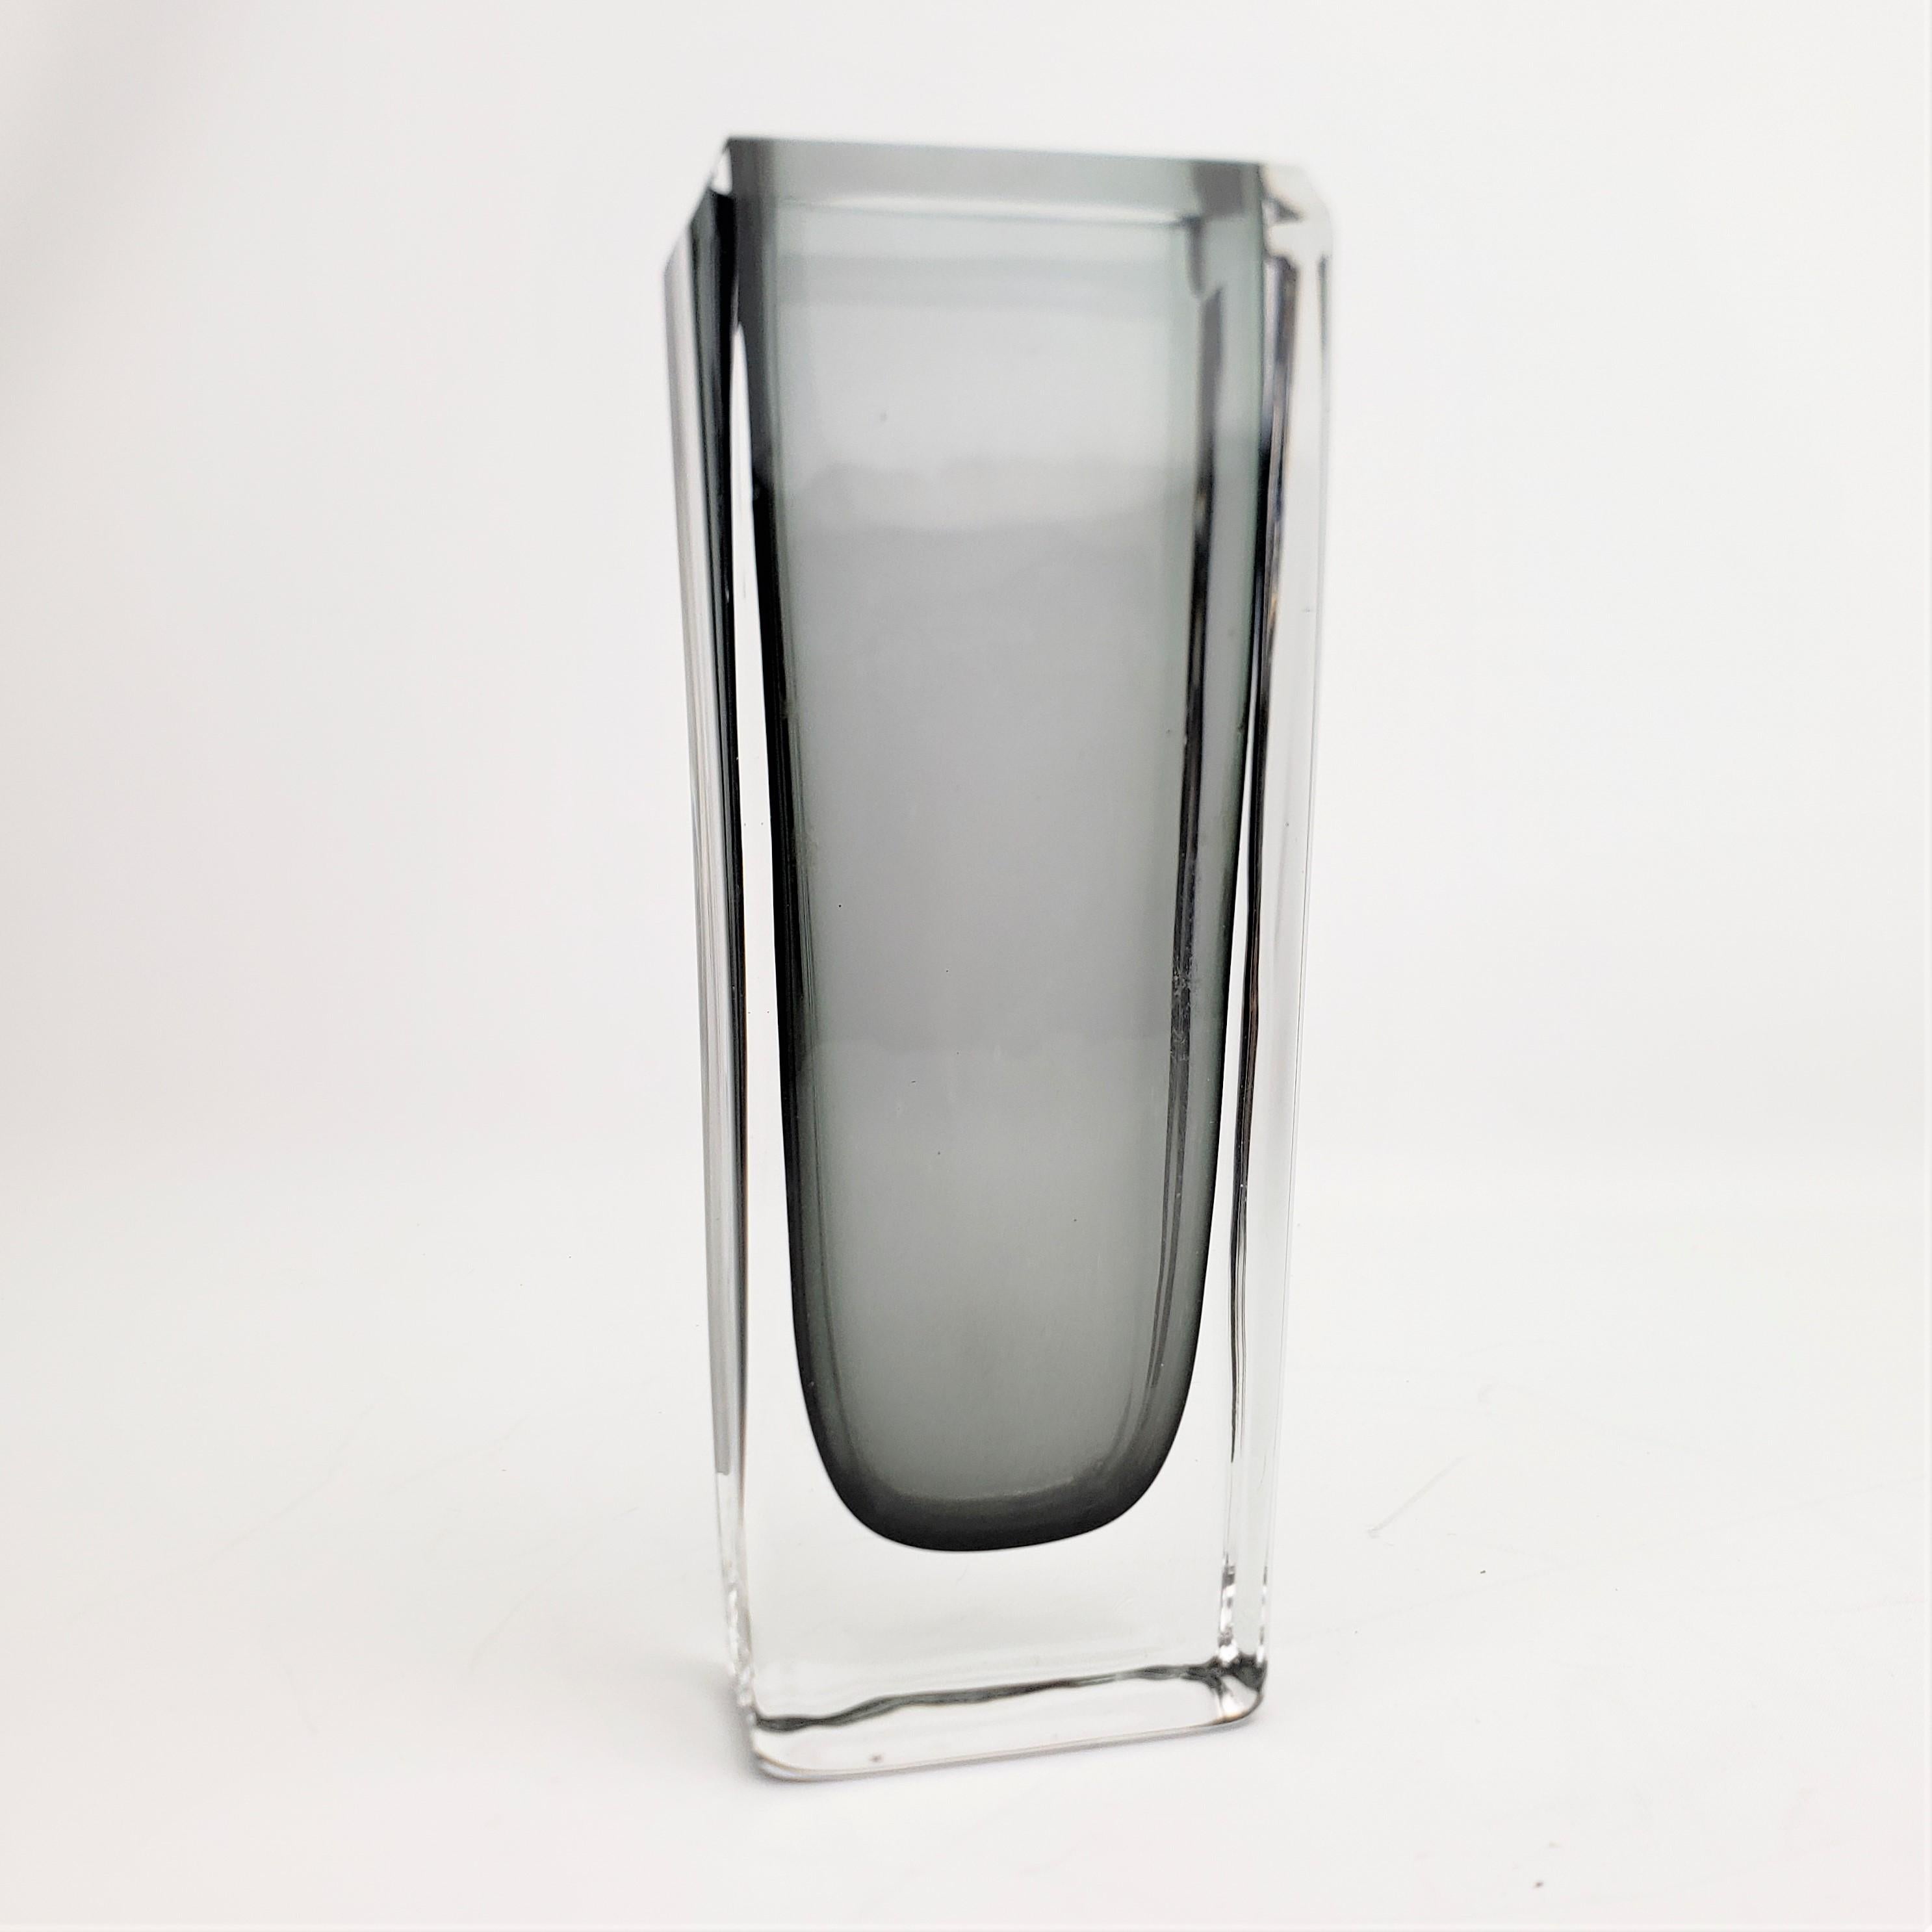 This very thick and heavy grey and clear art glass vase is signed by an unknown artist, but presumed to originate from Scandinavia, likely Sweden, in approximately 1970 in the period Mid-Century Modern style. The vase is done in a thick clear glass